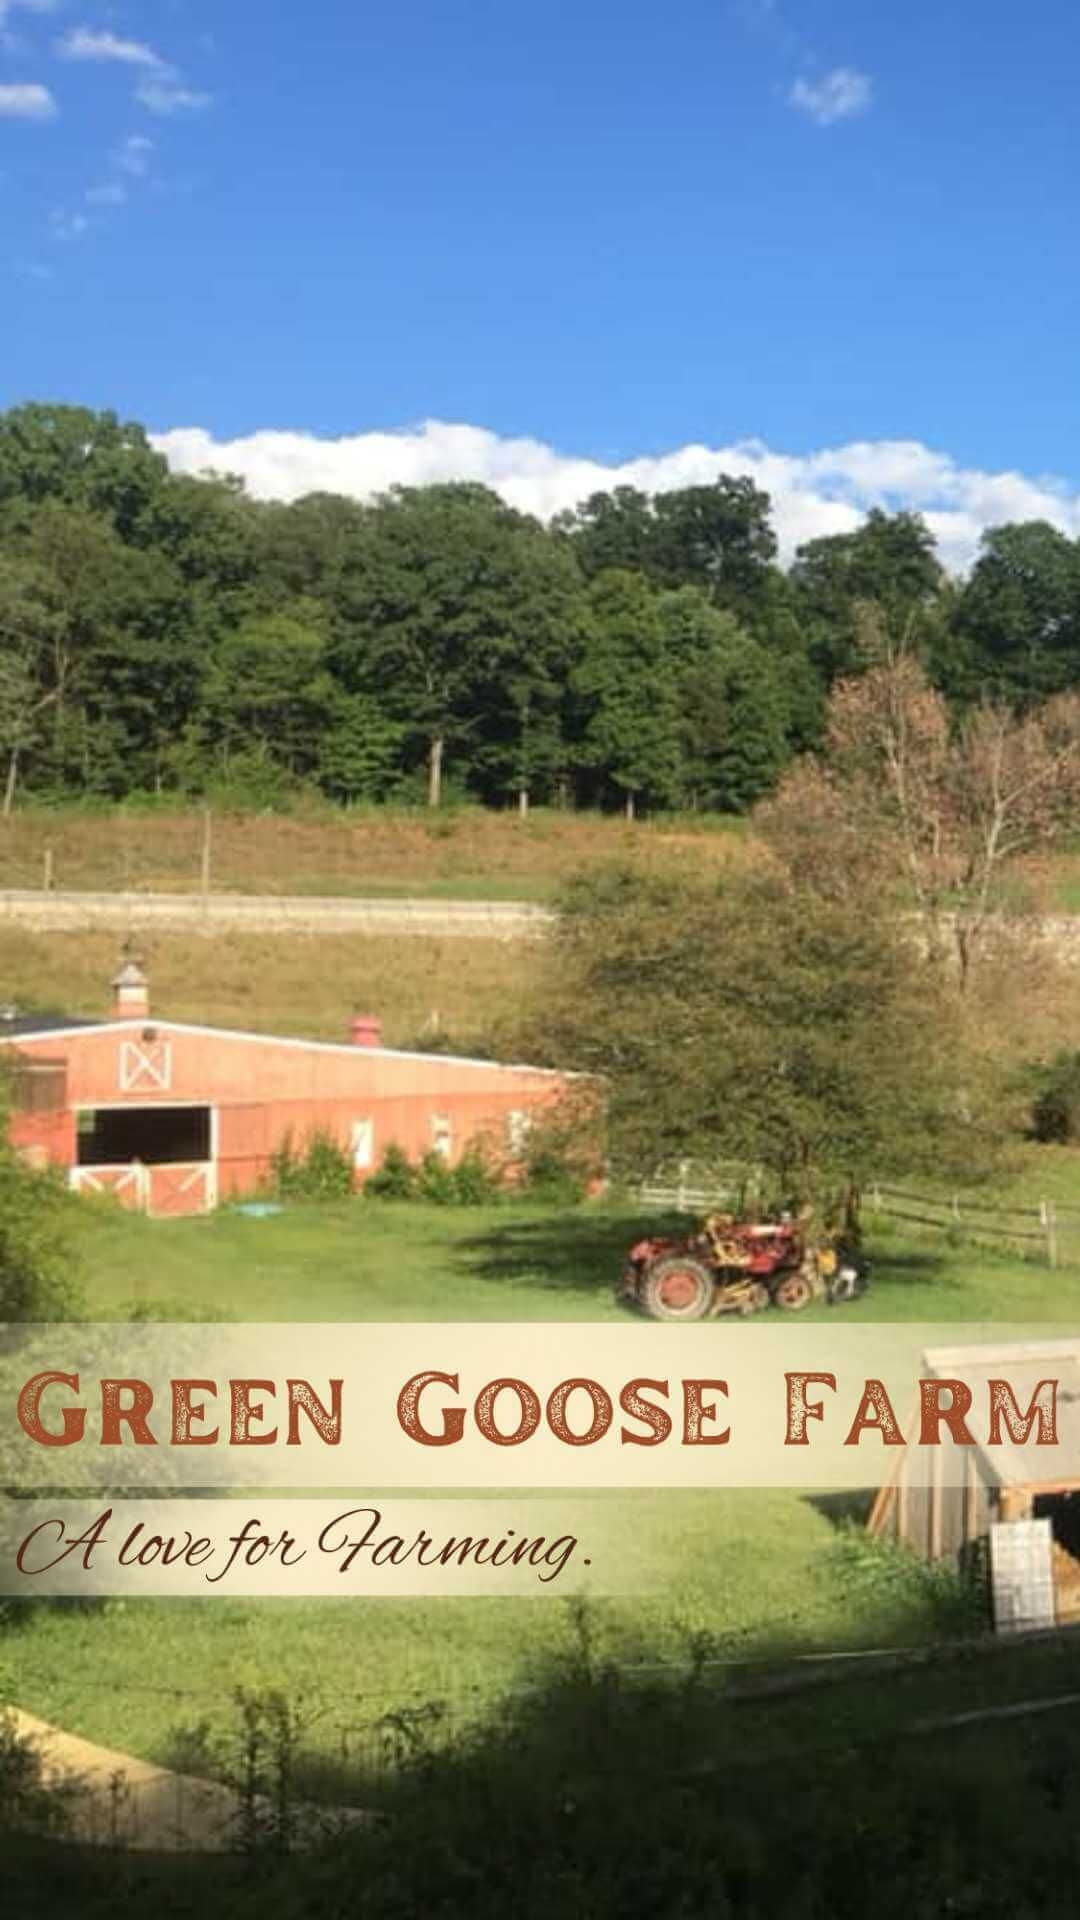 Green Goose Farm landscape photo with overlay saying "green goose farm, a love for farming"